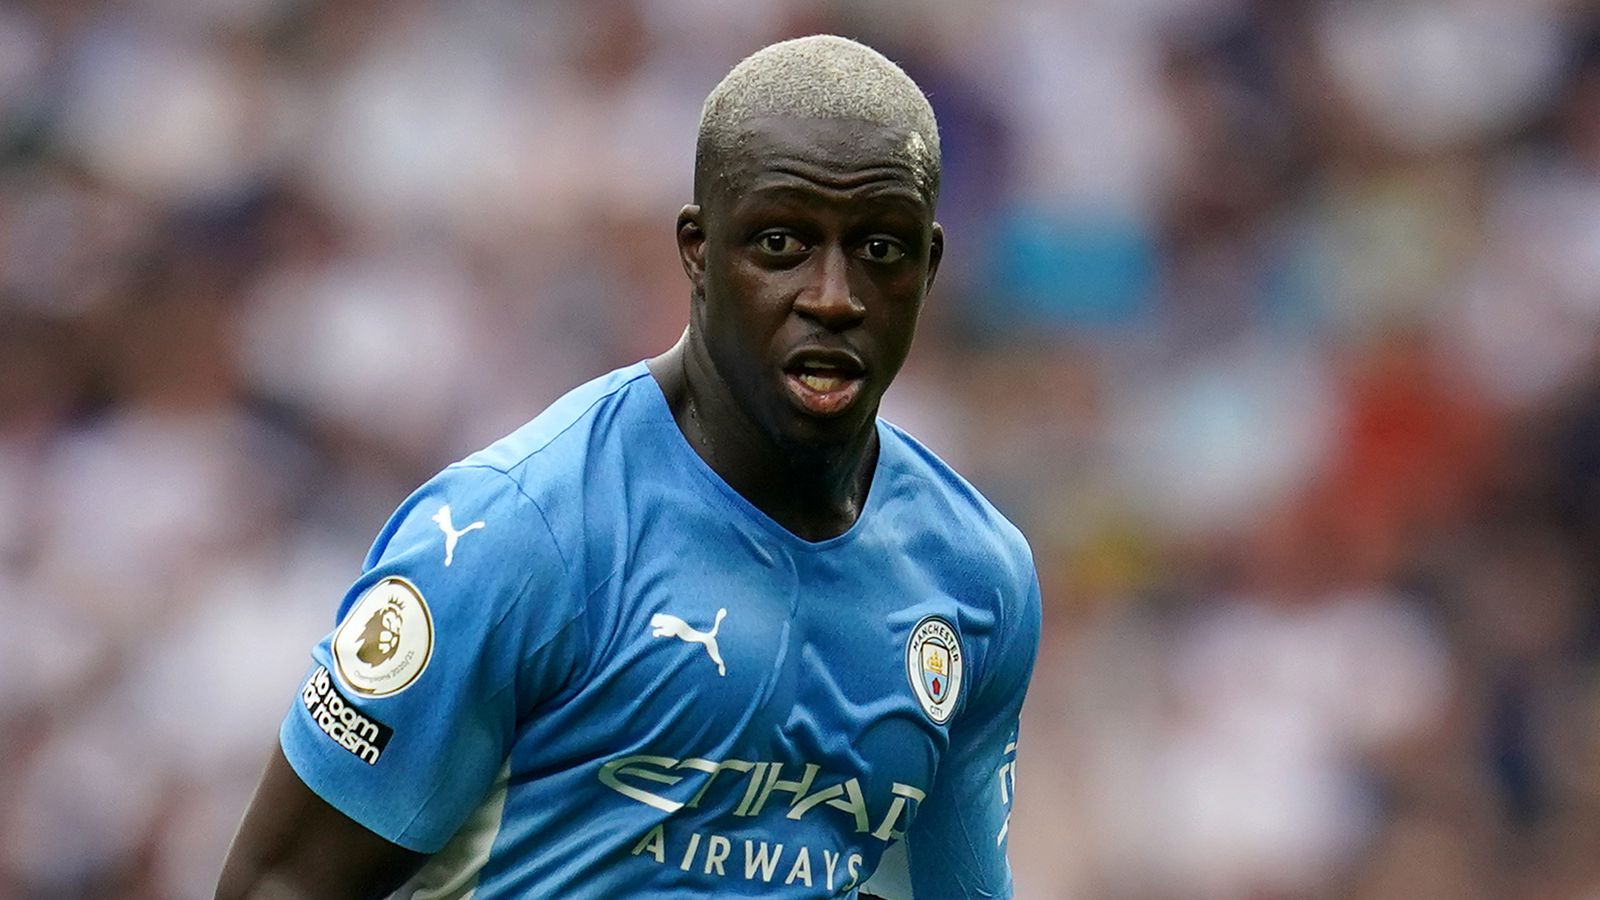 Benjamin Mendy signs for new club - days after he was found not guilty of rape